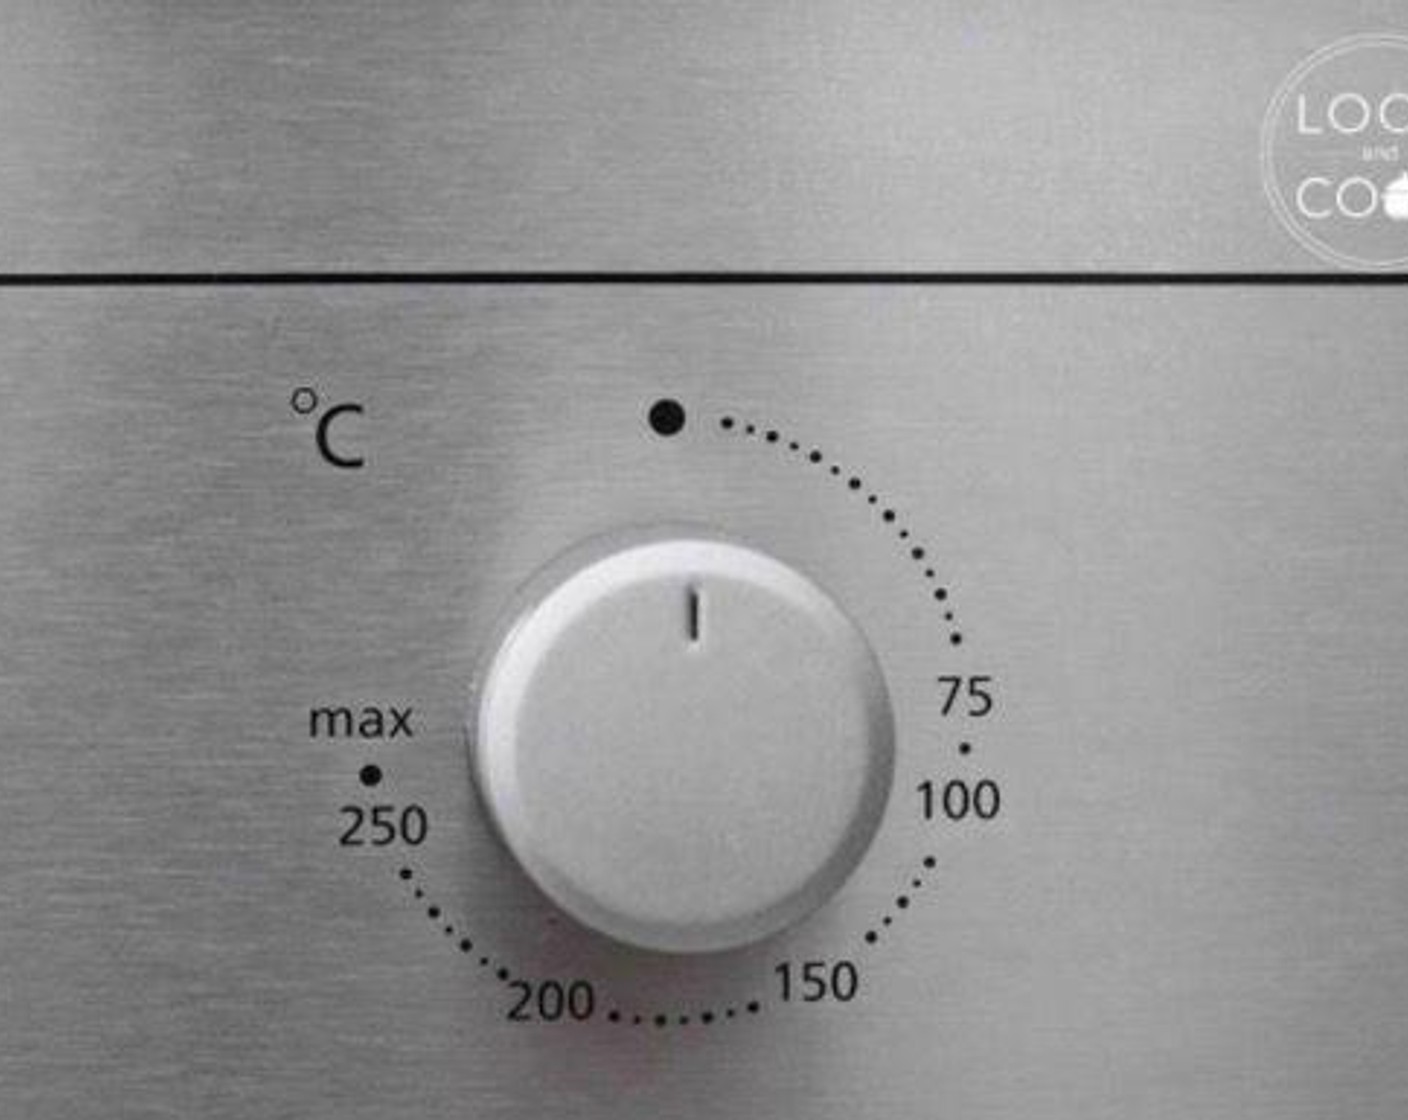 step 1 Preheat the oven at 180 degrees C (350 degrees F).